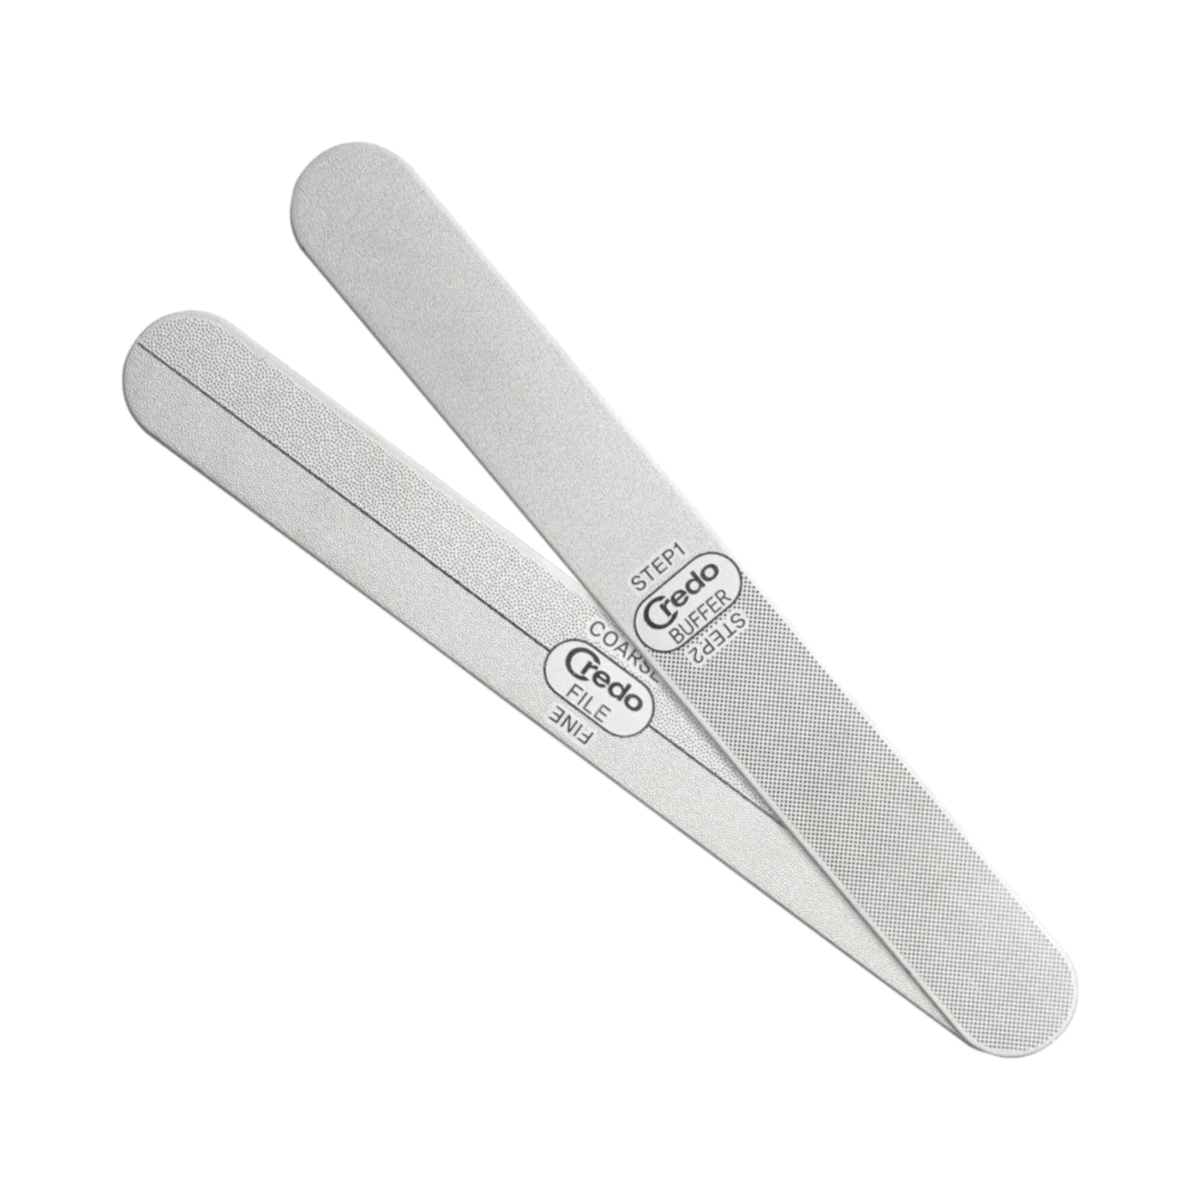 Primary Image of Stainless Steel 2-in-1 Metal Nailfile and Buffer